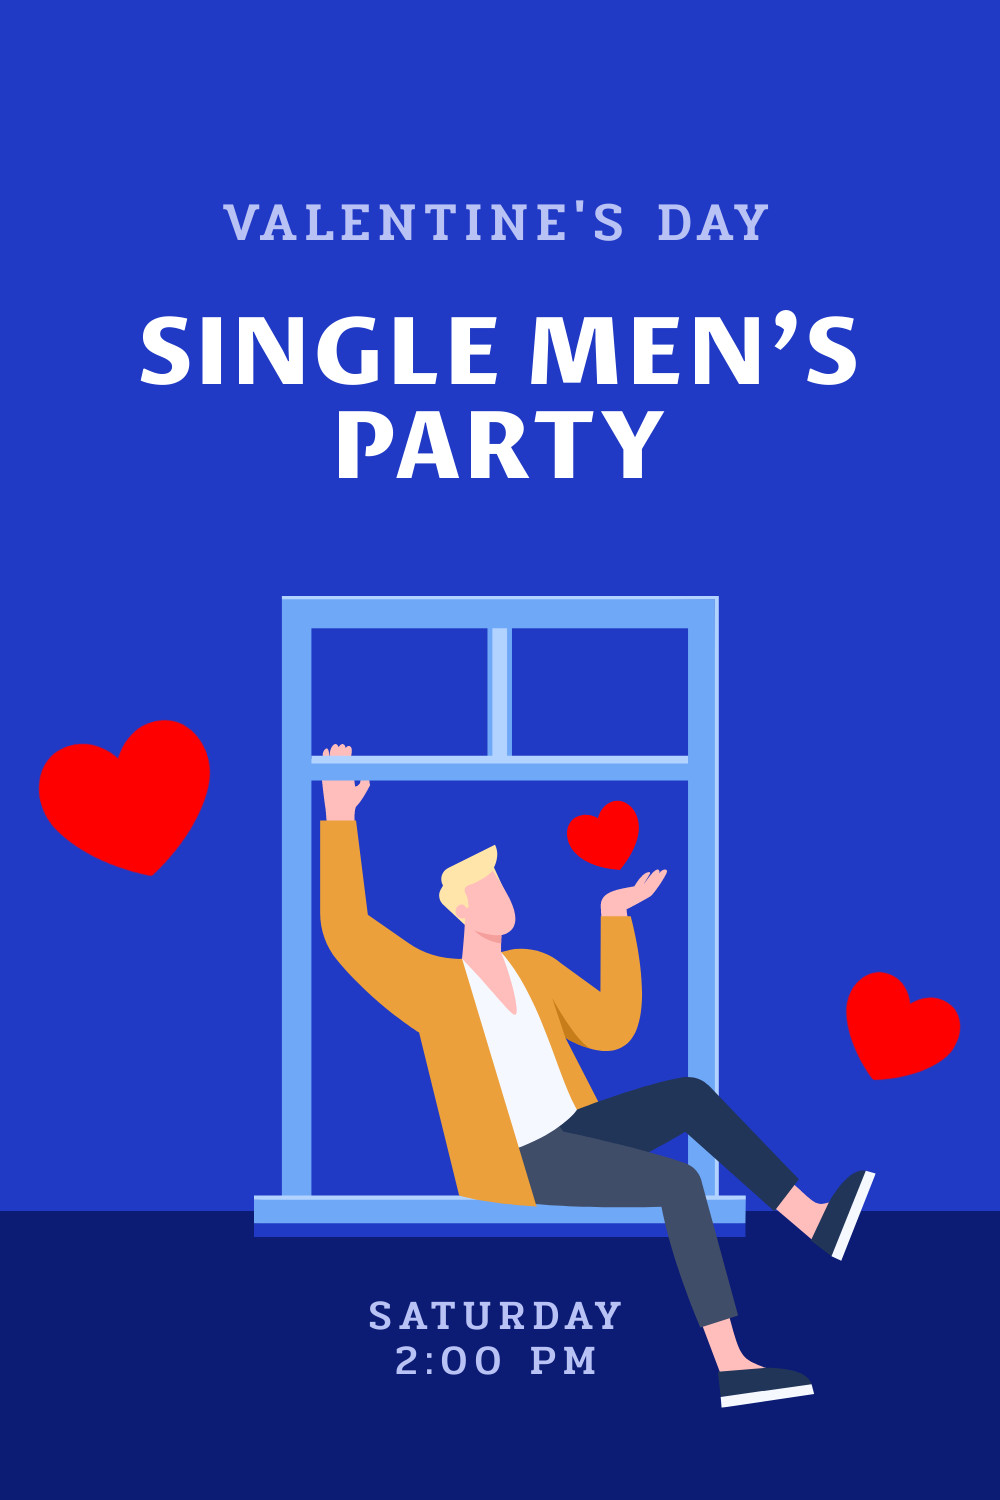 Valentine's Day Single Men Party Facebook Cover 820x360